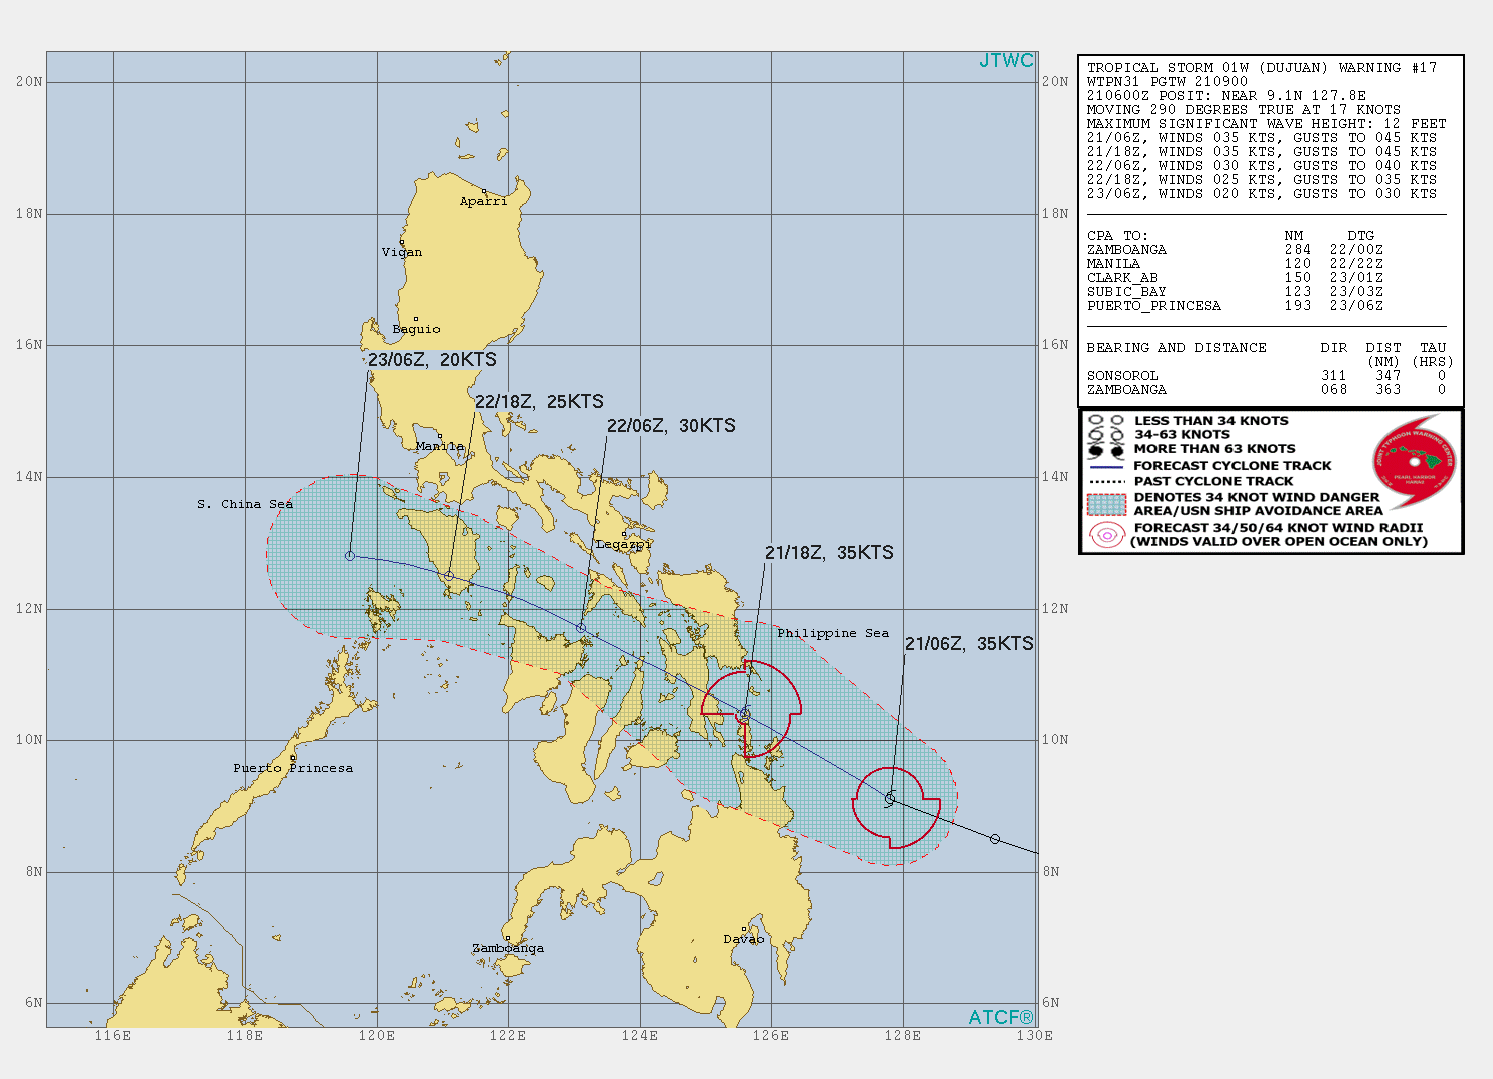 01W(DUJUAN). WARNING 17 ISSUED AT 22/09UTC.ANALYSIS INDICATES WARM (29C) ALONG-TRACK SST IN THE  PHILIPPINE SEA AND ROBUST WEST AND POLEWARD OUTFLOW ALOFT. A SLIGHT  DECREASE IN WIND SHEAR DUE TO THE STORM MOTION MOVING MORE IN-PHASE WITH THE  MID AND UPPER LEVEL WIND FLOW HAS ENHANCED THE CONVECTION AHEAD OF THE  LOW LEVEL CENTER. ADDITIONALLY, THE WARM MOIST AIR AHEAD OF 01W IS CONTINUALLY  OVERRUNNING THE COLDER NORTHEASTERLY WIND IN THE PHILIPPINE SEA  INCREASING THE INSTABILITY. THE CYCLONE IS TRACKNG UNDER THE STEERING  INFLUENCE OF THE SUBTROPICAL RIDGE TO THE NORTHEAST.   TS DUJUAN WILL CONTINUE TRACKING NORTHWESTWARD UNDER THE SUBTROPICAL RIDGE,  MAKING INITIAL LANDFALL OVER LEYTE, PHILIPPINES, AFTER 12H AND THEN  CROSS THE VISAYAN ISLANDS, CLIPPING THE SOUTHERN TIP OF MINDORO, BEFORE  EXITING INTO THE SOUTH CHINA SEA. THE SYSTEM WILL MAINTAIN ITS CURRENT  INTENSITY UP TO 12H. AFTERWARD, INCREASED RELATIVE WIND SHEAR (25KTS+)  COMBINED WITH THE RUGGED TERRAIN OF THE ISLANDS WILL ERODE 01W TO  DISSIPATION BY 48H, POSSIBLY SOONER.